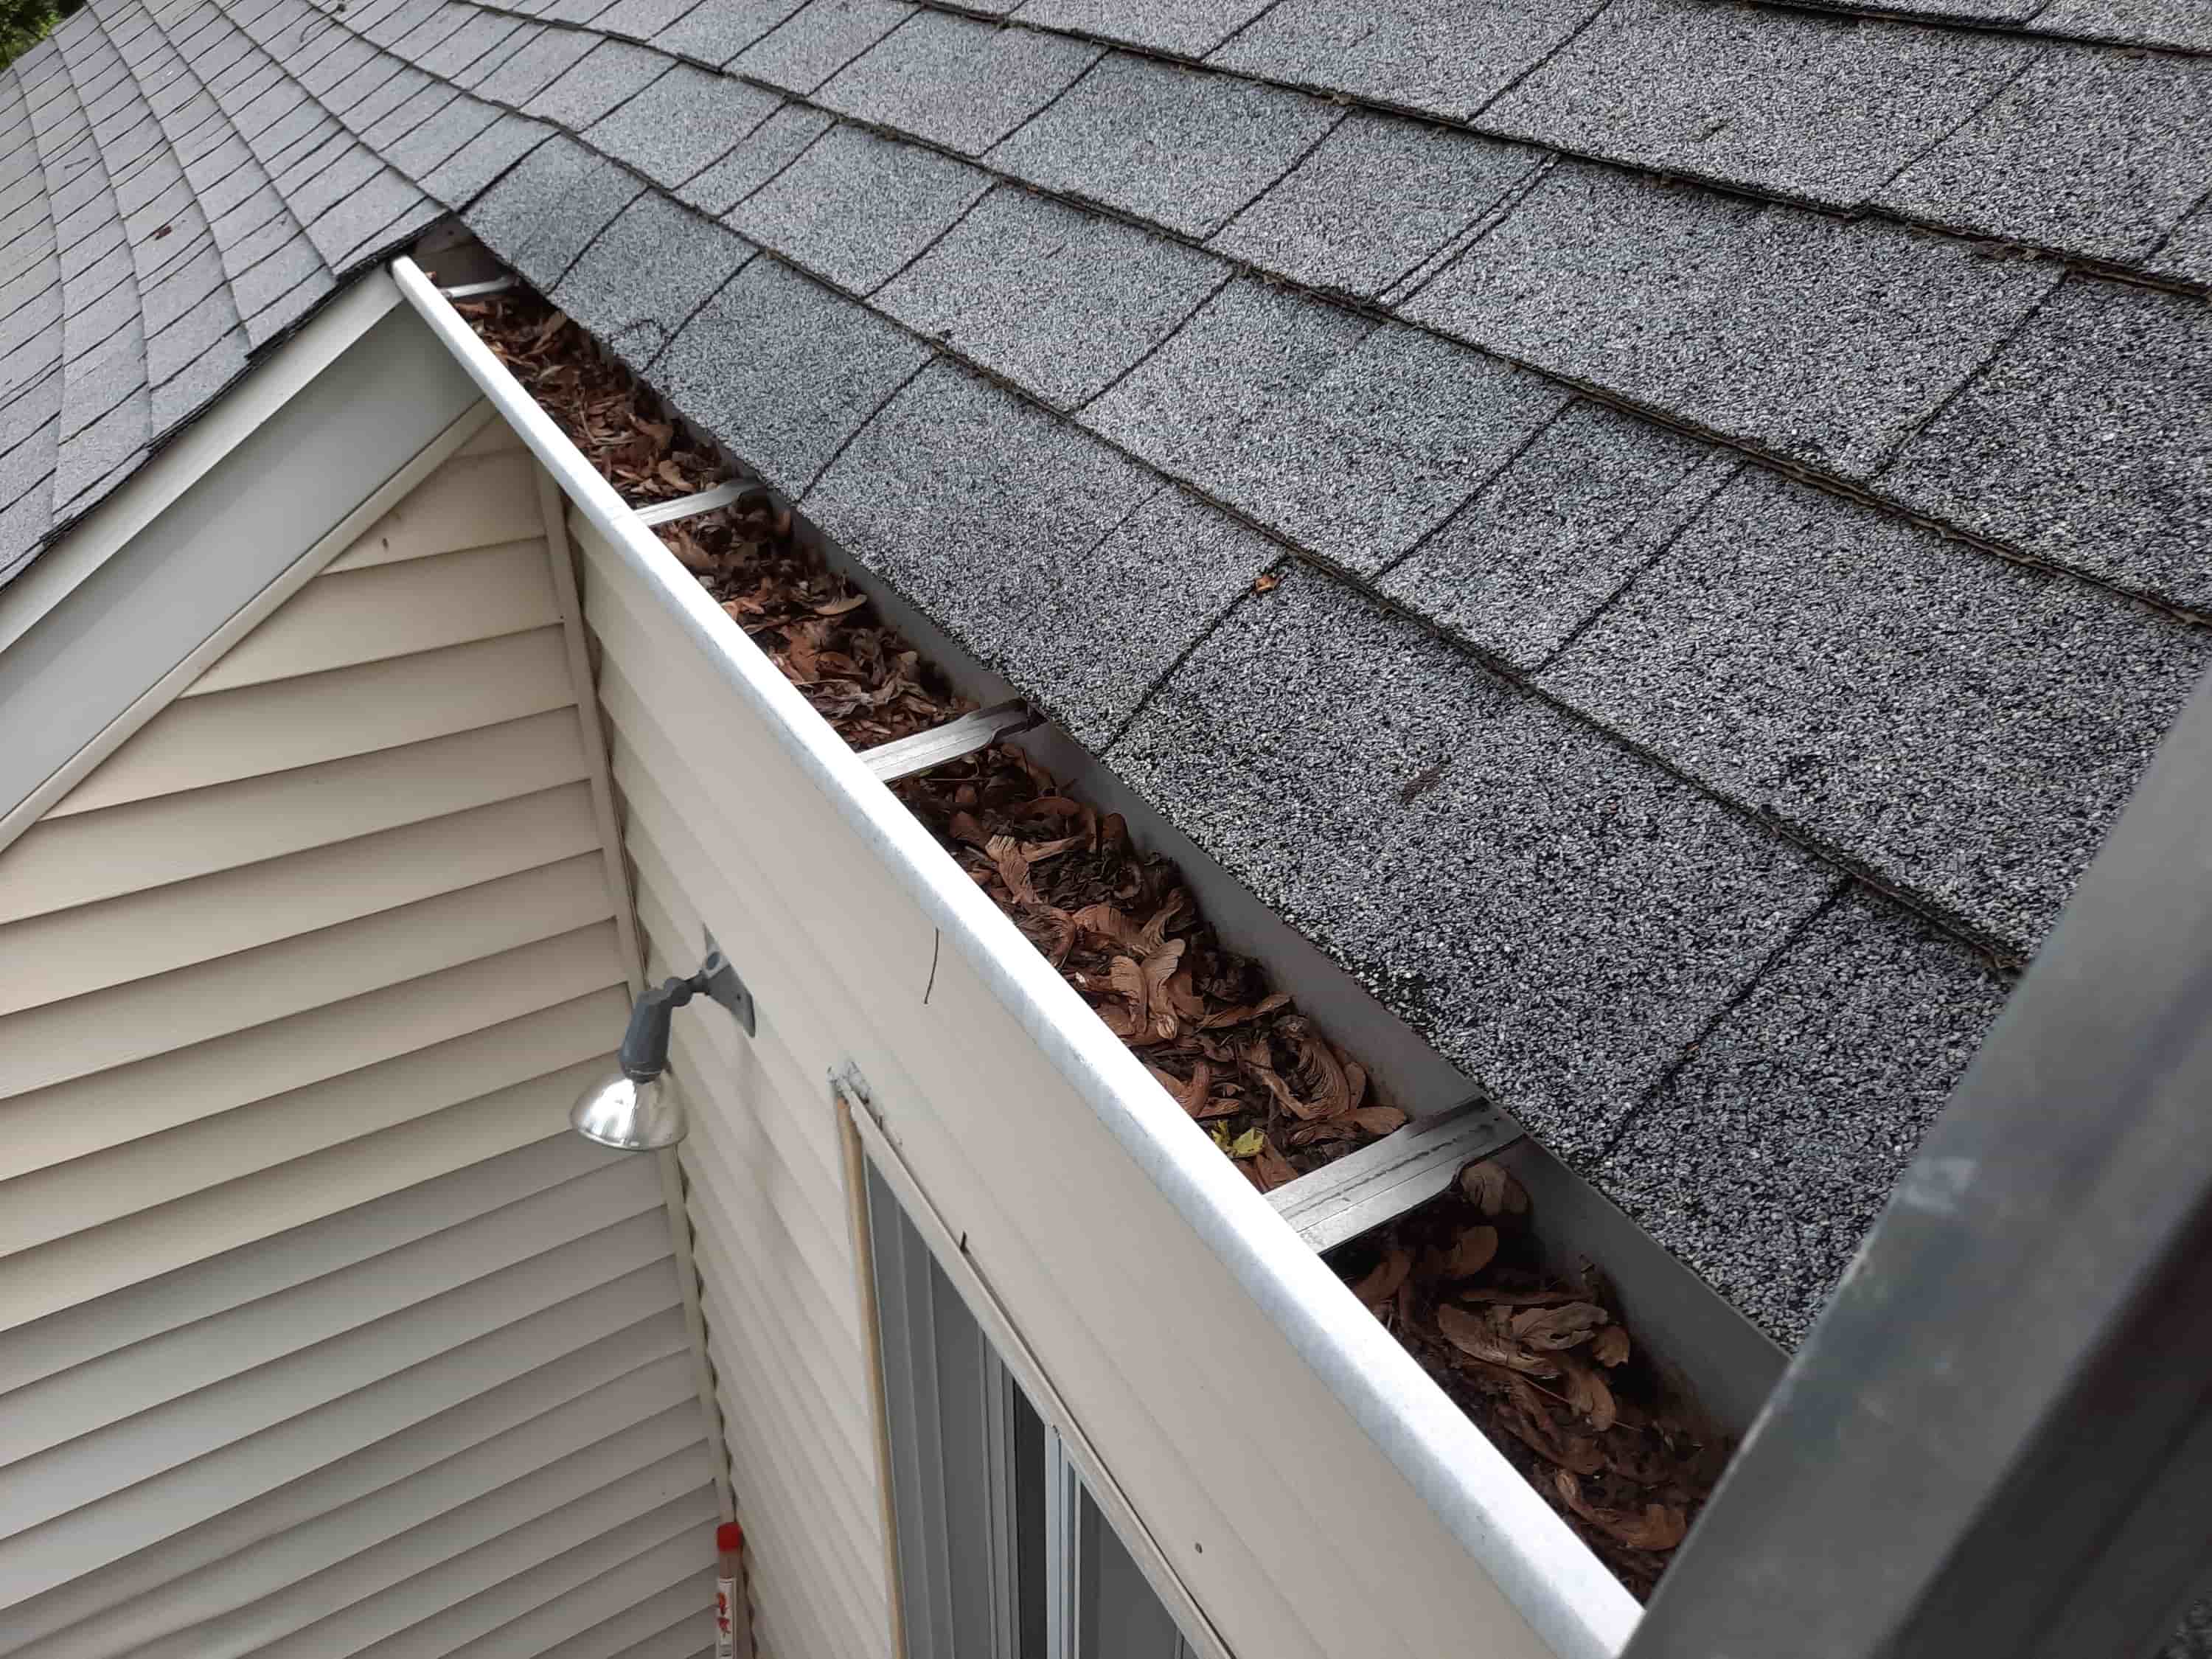 attachment to clean gutters